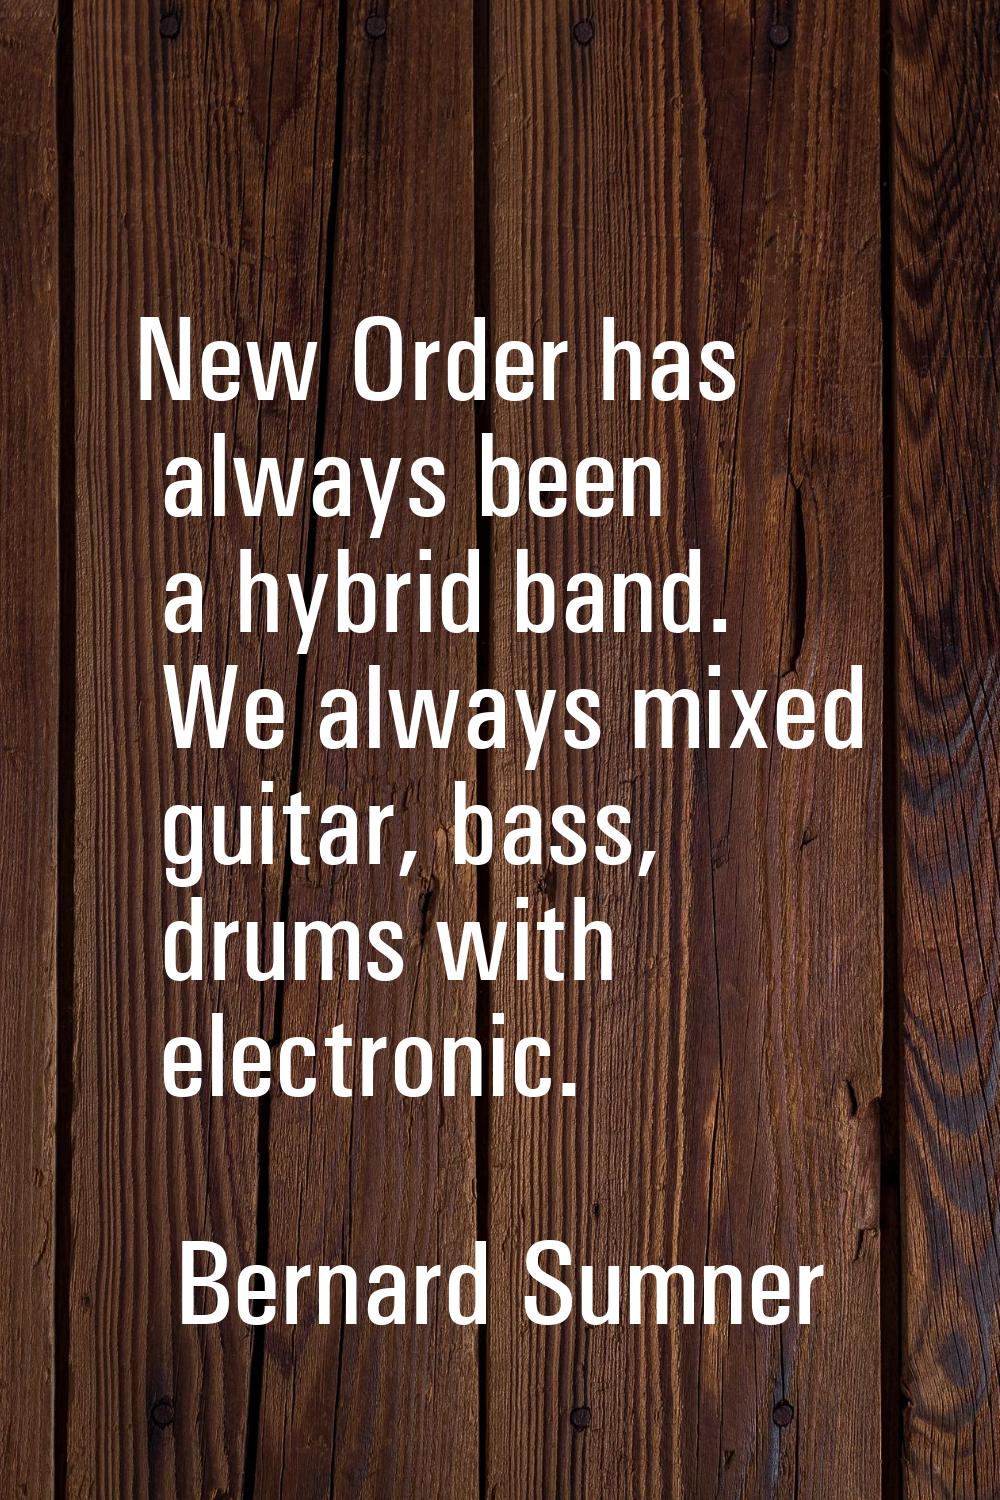 New Order has always been a hybrid band. We always mixed guitar, bass, drums with electronic.